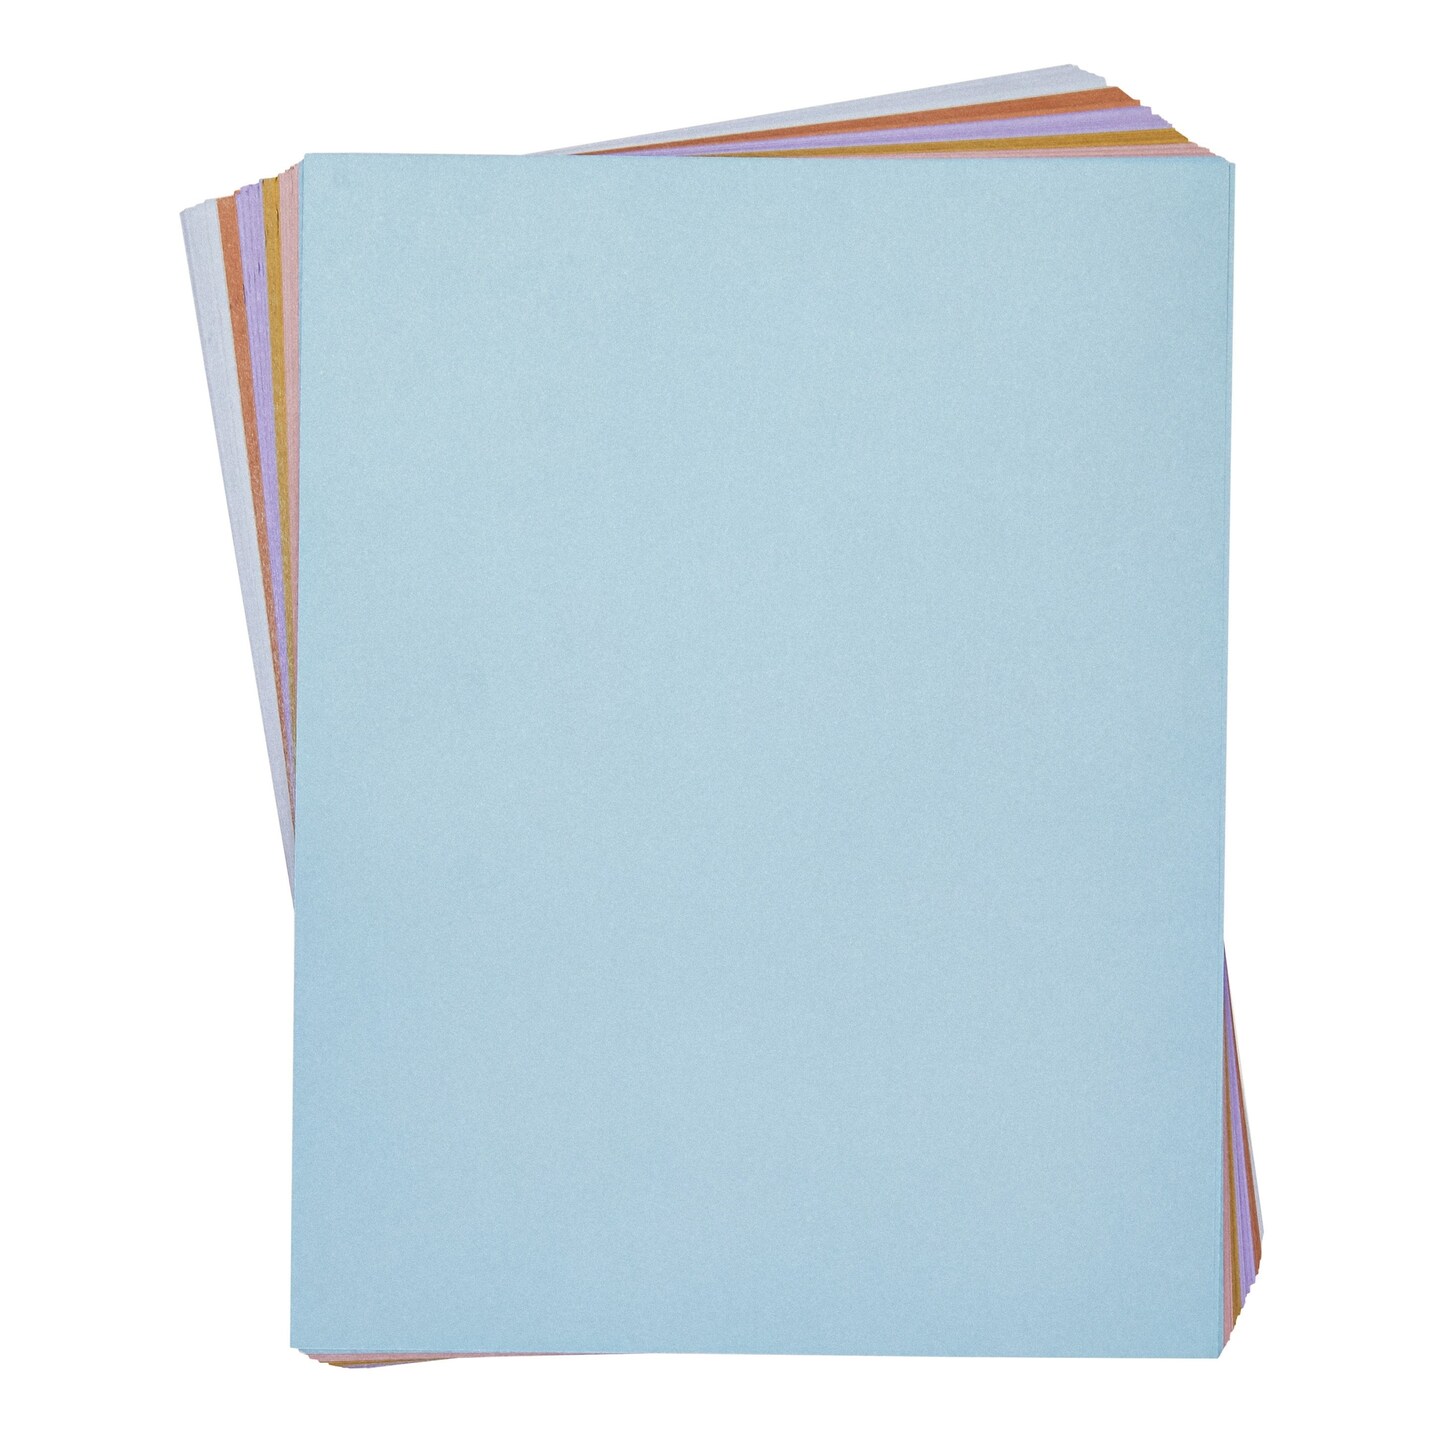 96 Sheets Shimmer Paper for Crafts, Scrapbooking, Invitations, Letter Size Stationery in 6 Pastel Colors (8.5 x 11 In)